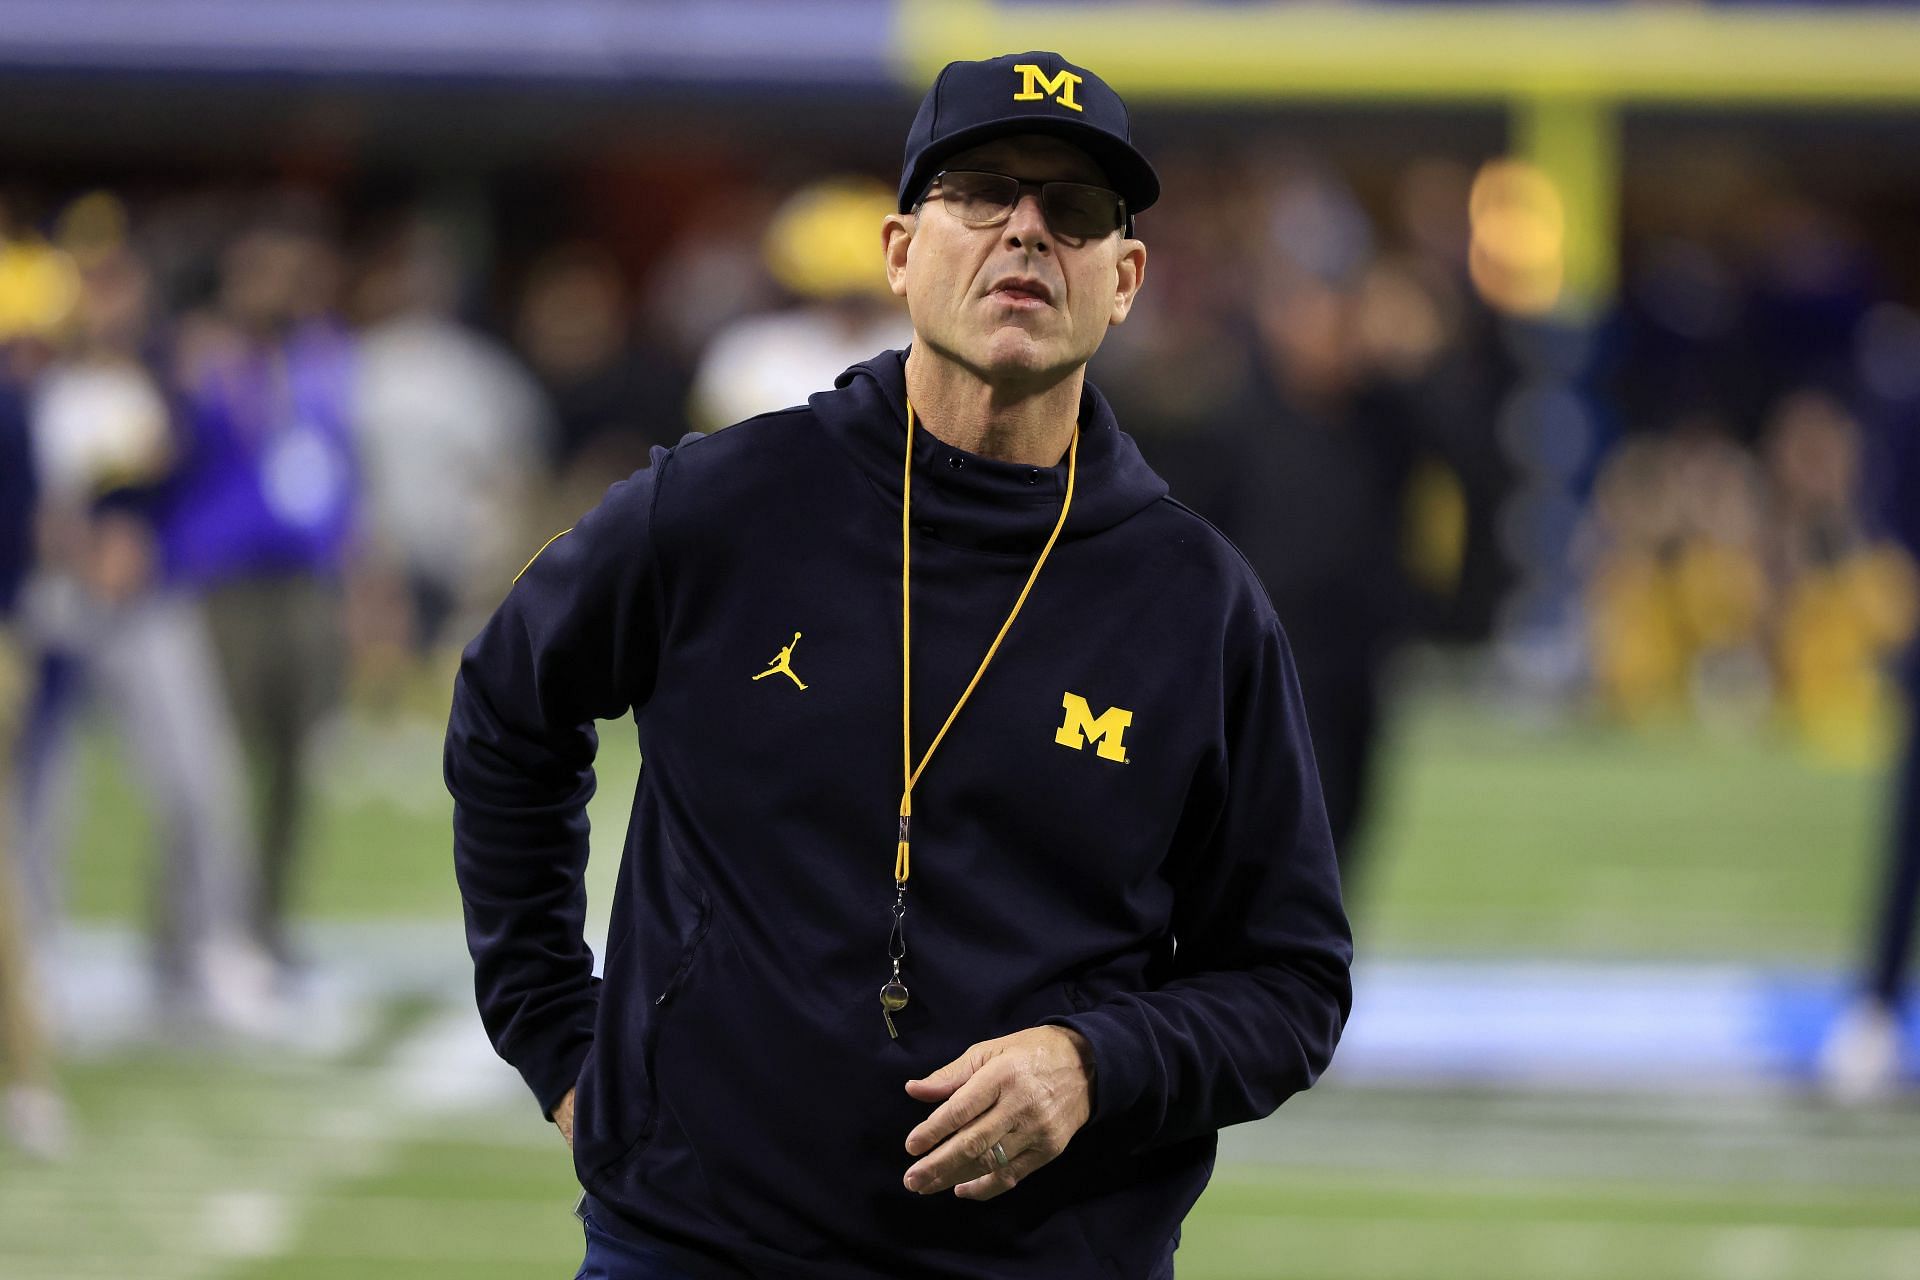 Harbaugh as seen prior to the Big Ten Championship Game in December (Photo: Getty)